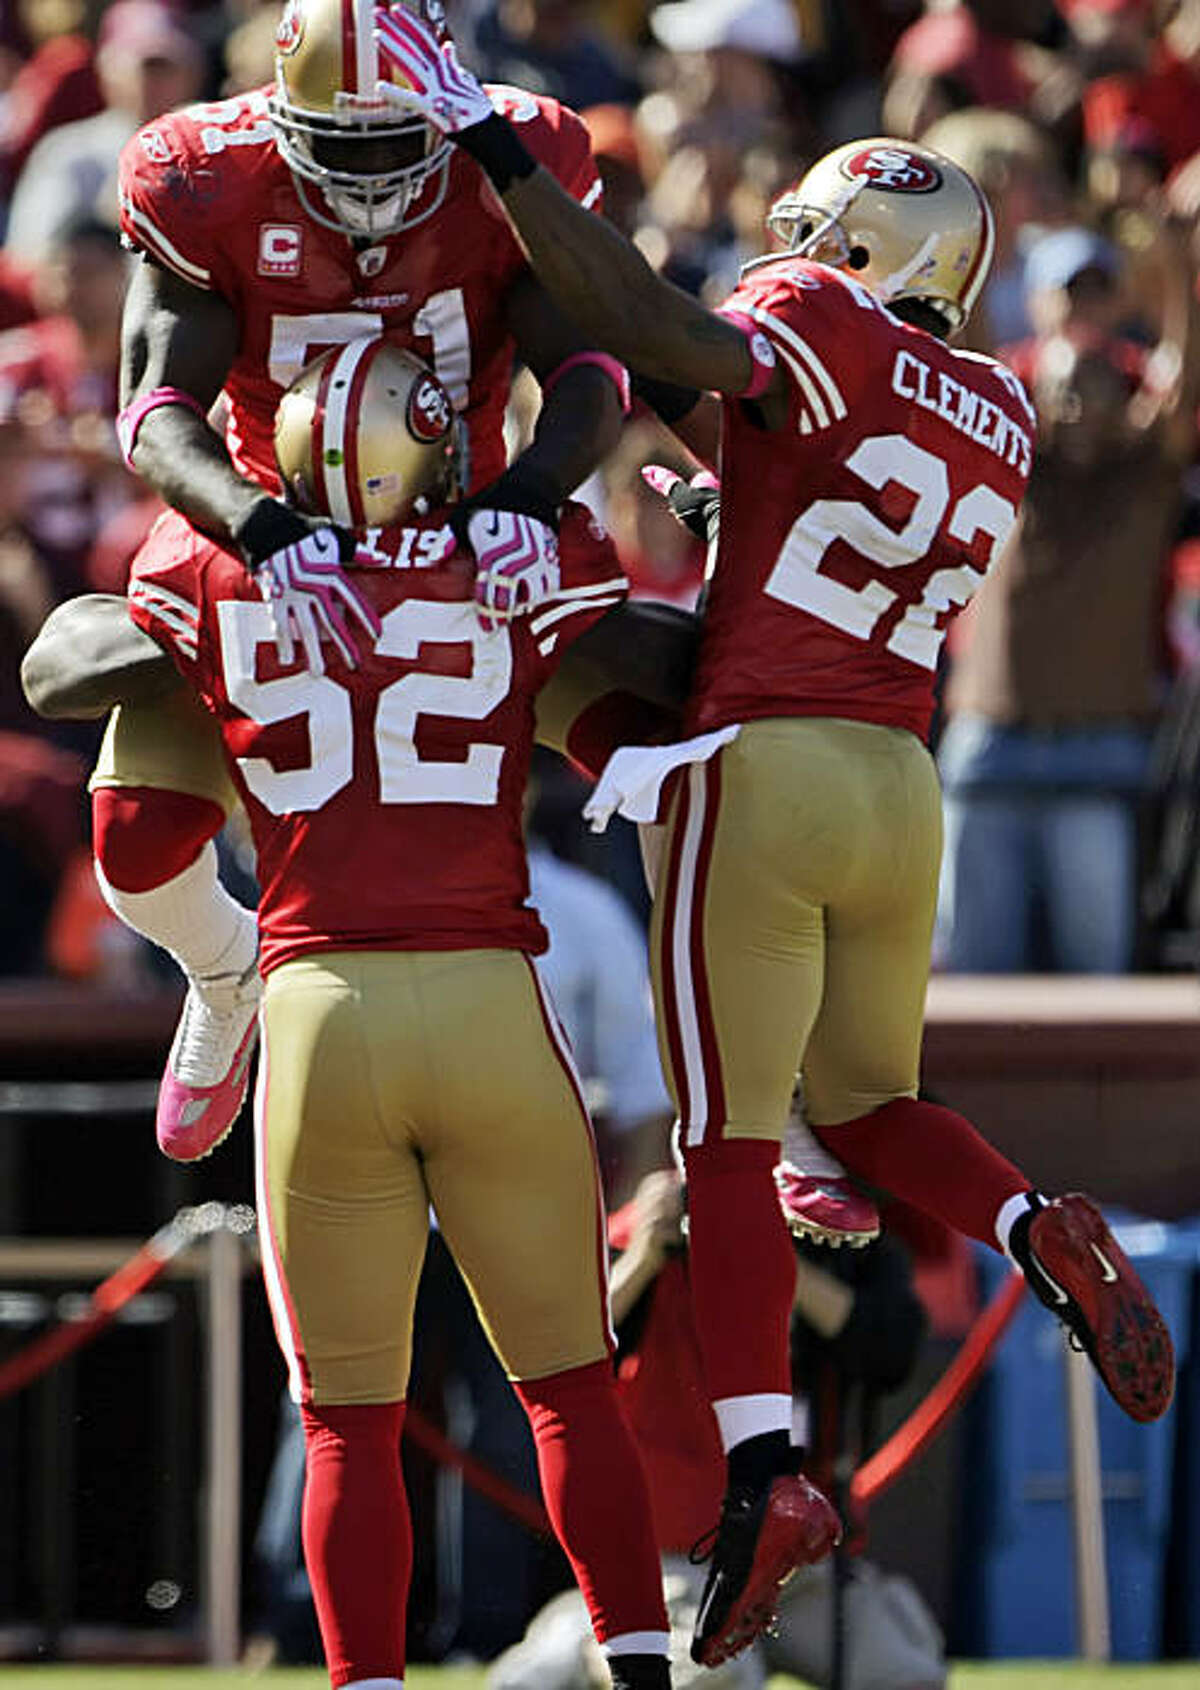 49ers Takeo Spikes, top, and Nate Clements, right, celebrate with Patrick Willis after Willis intercepted a Kyle Boller pass and ran it back for a touchdown in the third quarter of their game against the St. Louis Rams at Candlestick Park in San Francisco on Sunday.